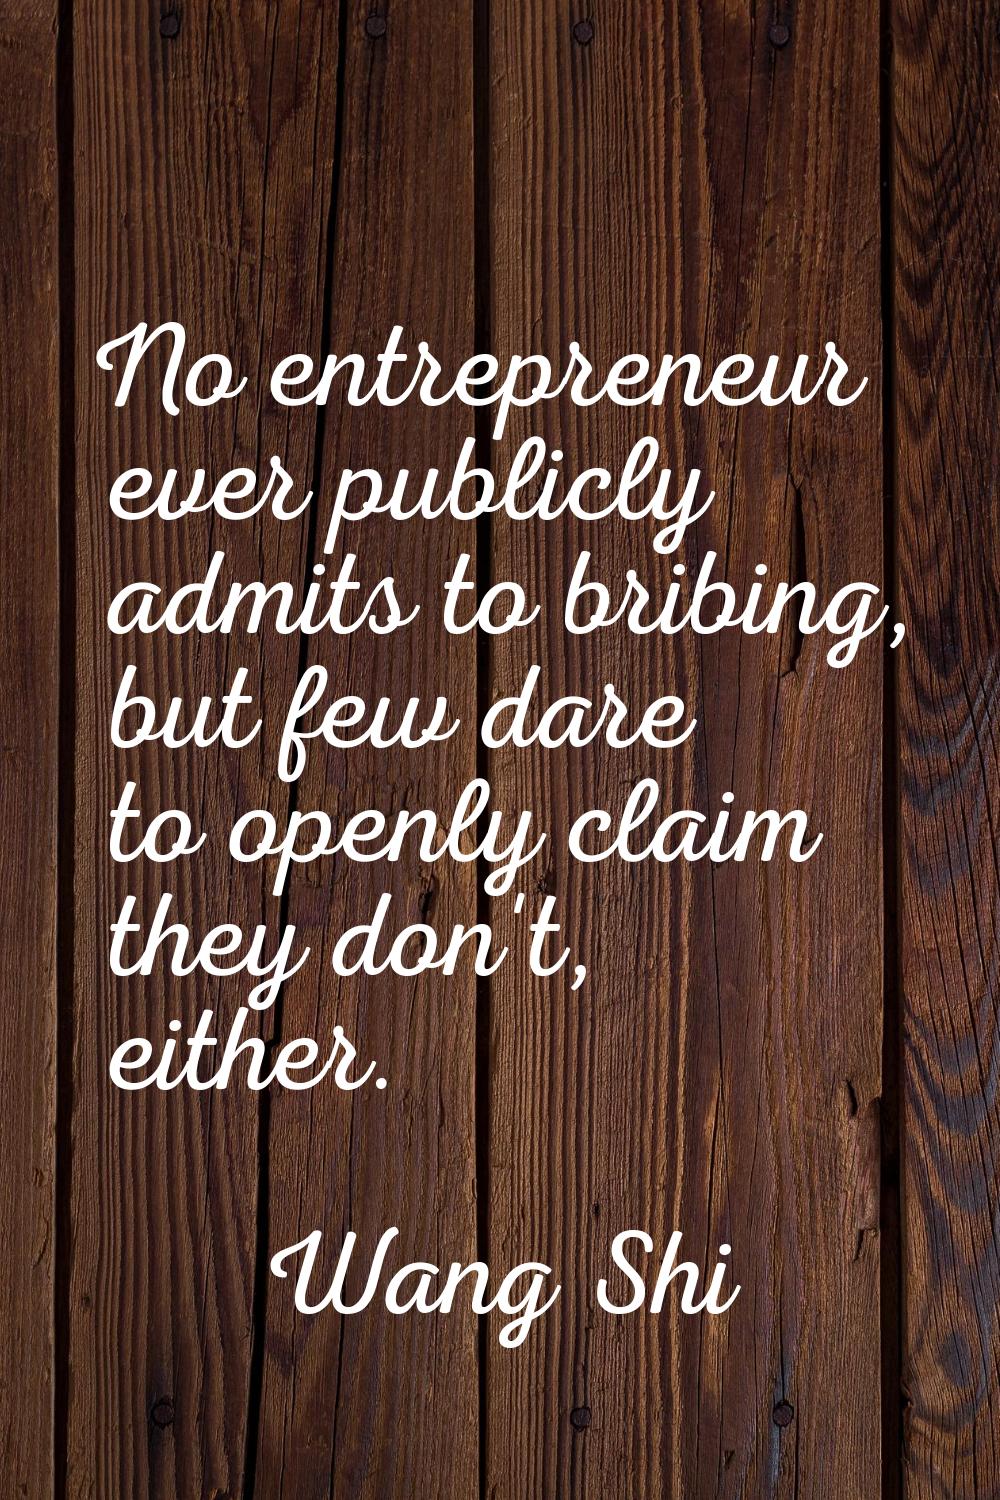 No entrepreneur ever publicly admits to bribing, but few dare to openly claim they don't, either.